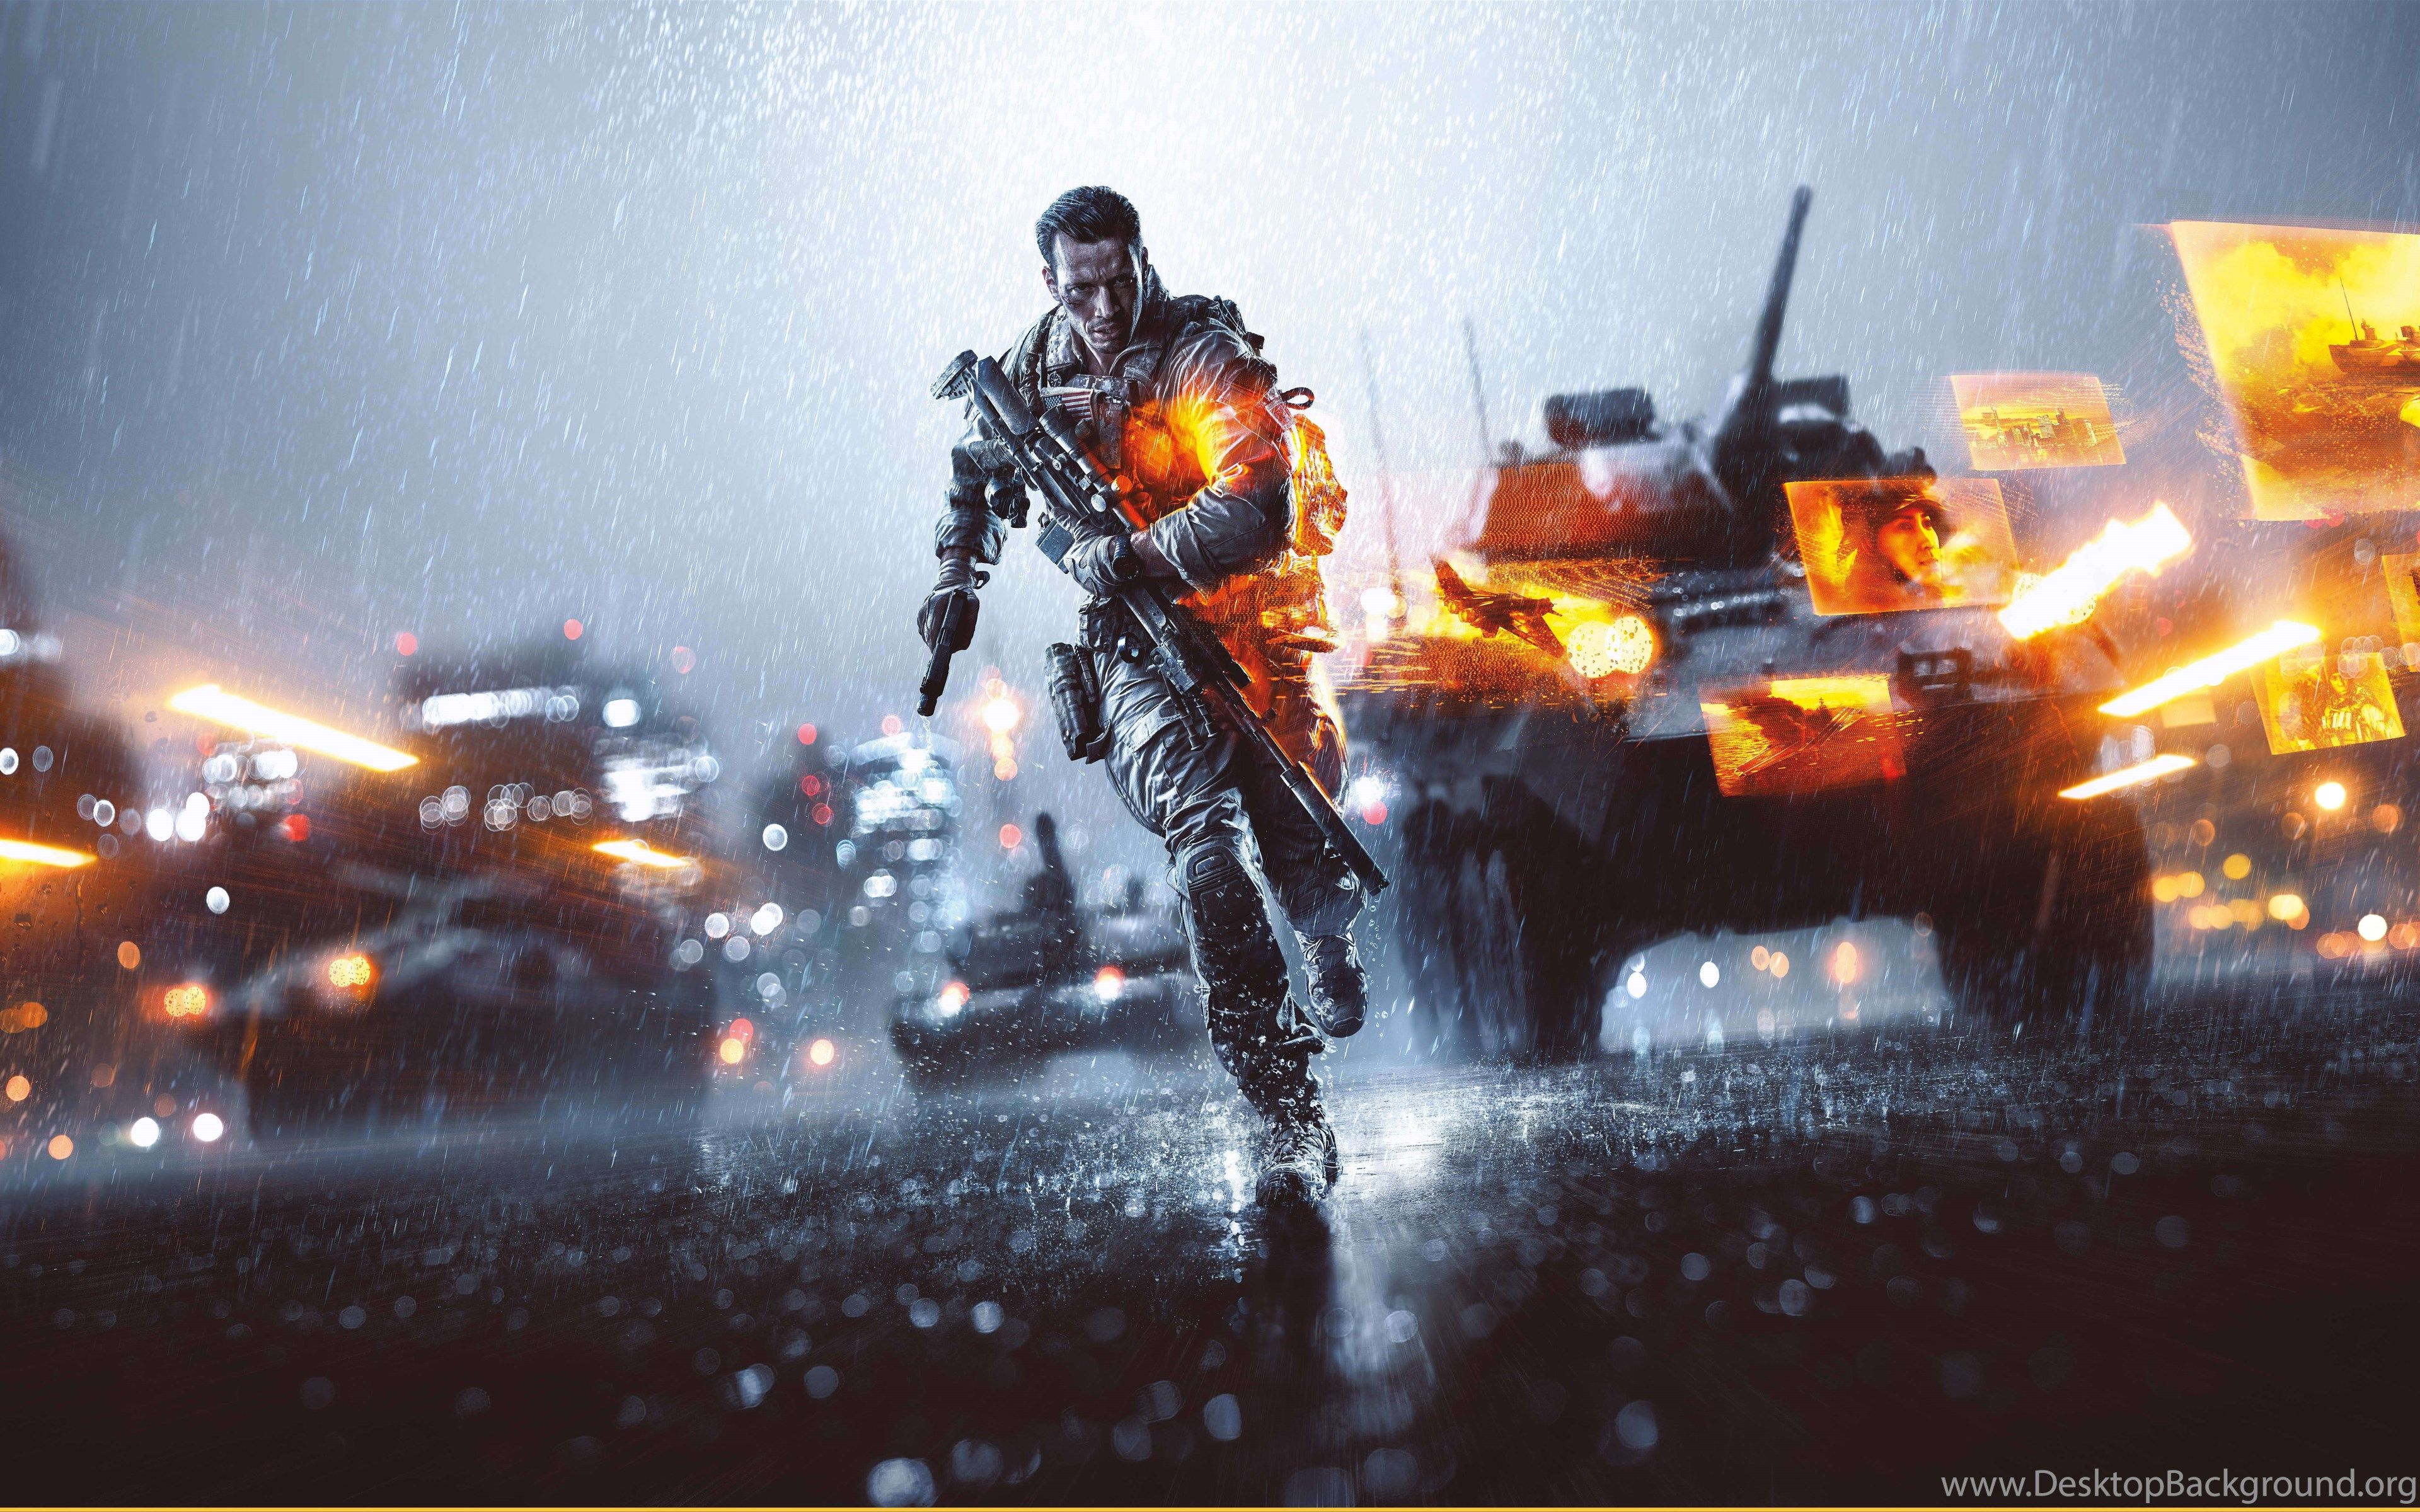 4k game wallpaper, explosion, vehicle, firefighter, geological phenomenon, fictional character